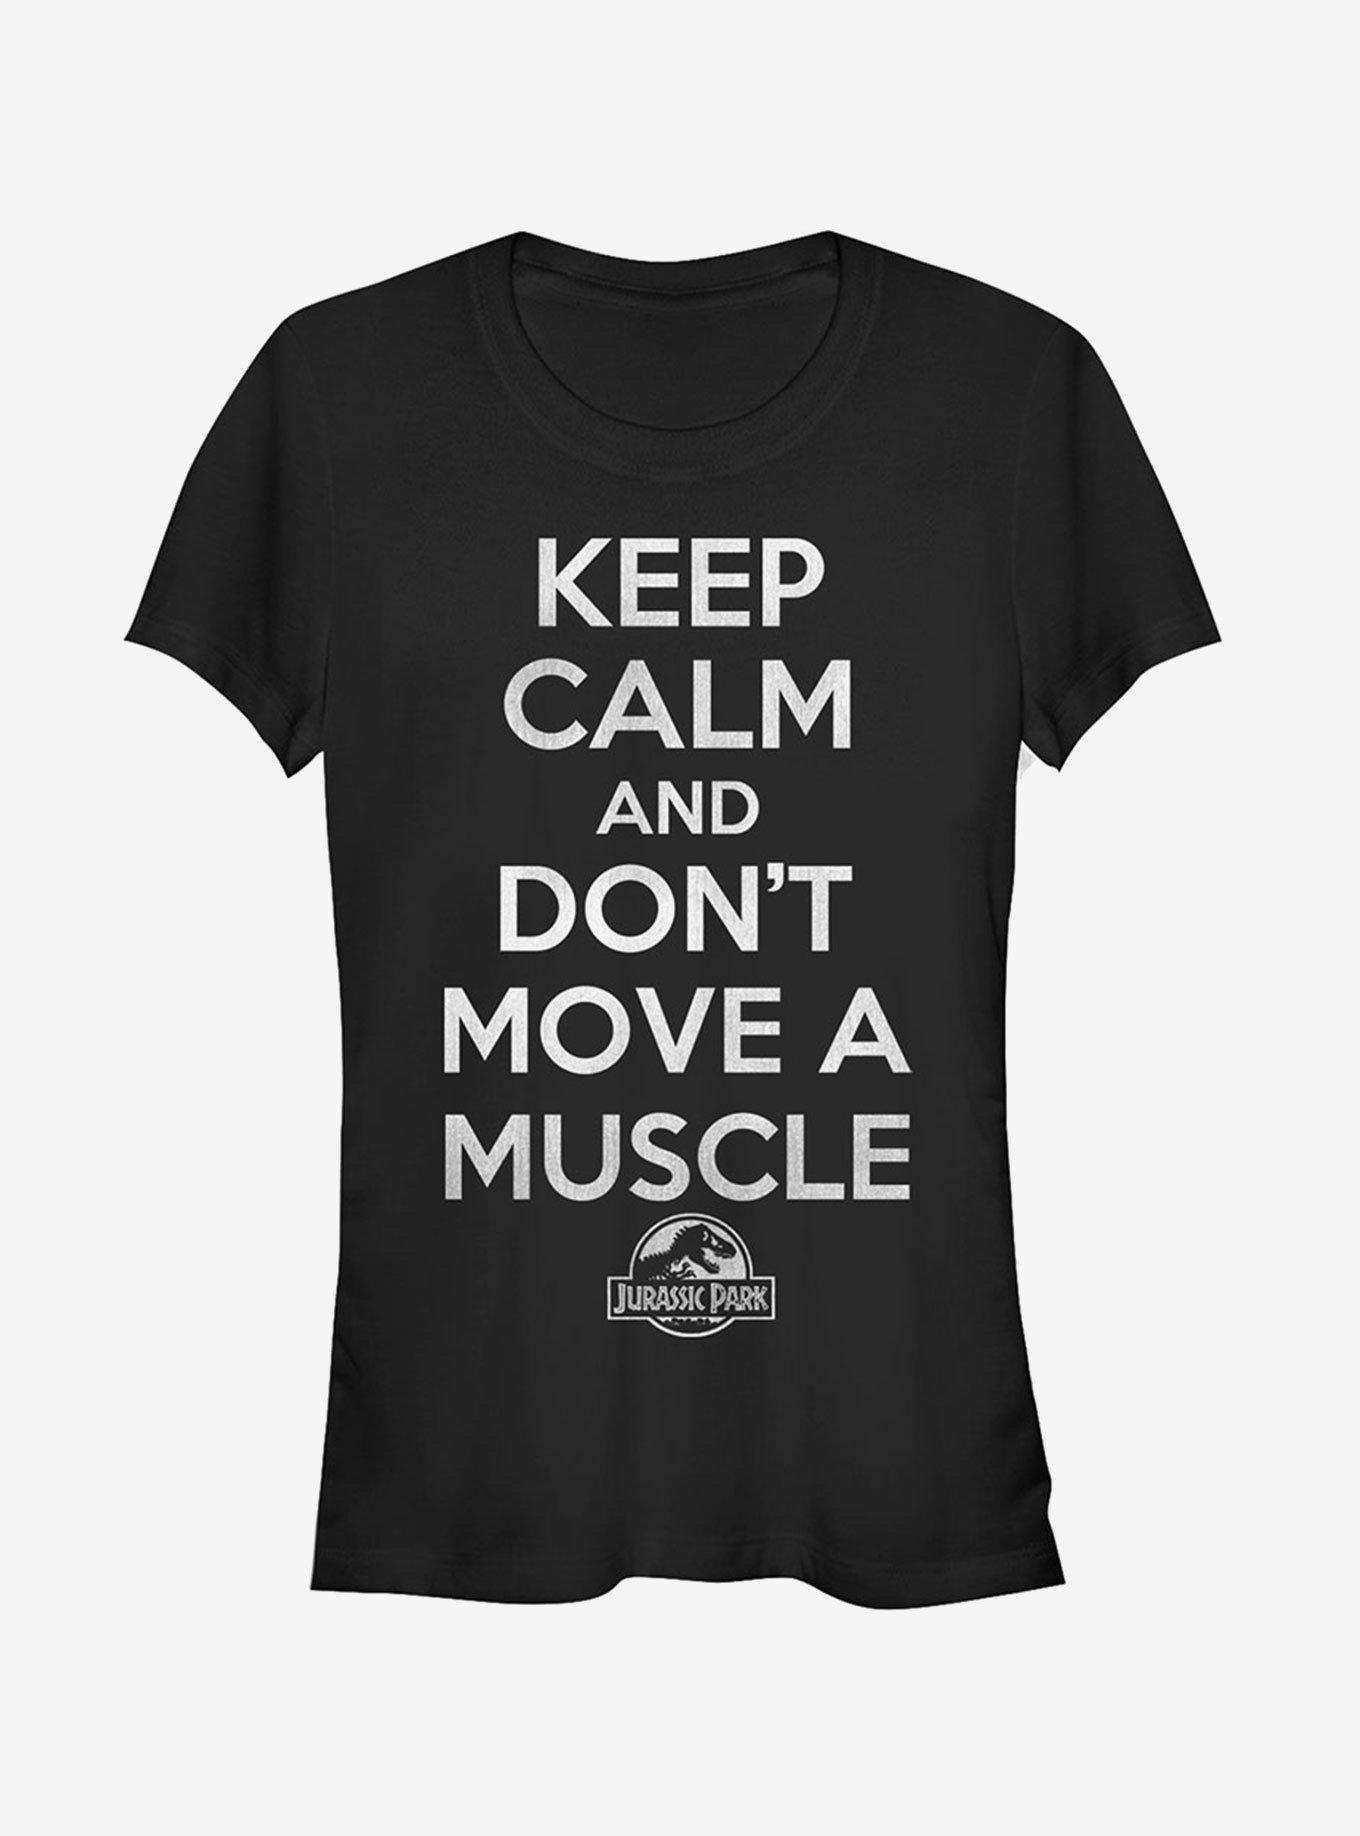 Keep Calm and Don't Move a Muscle Girls T-Shirt, BLACK, hi-res